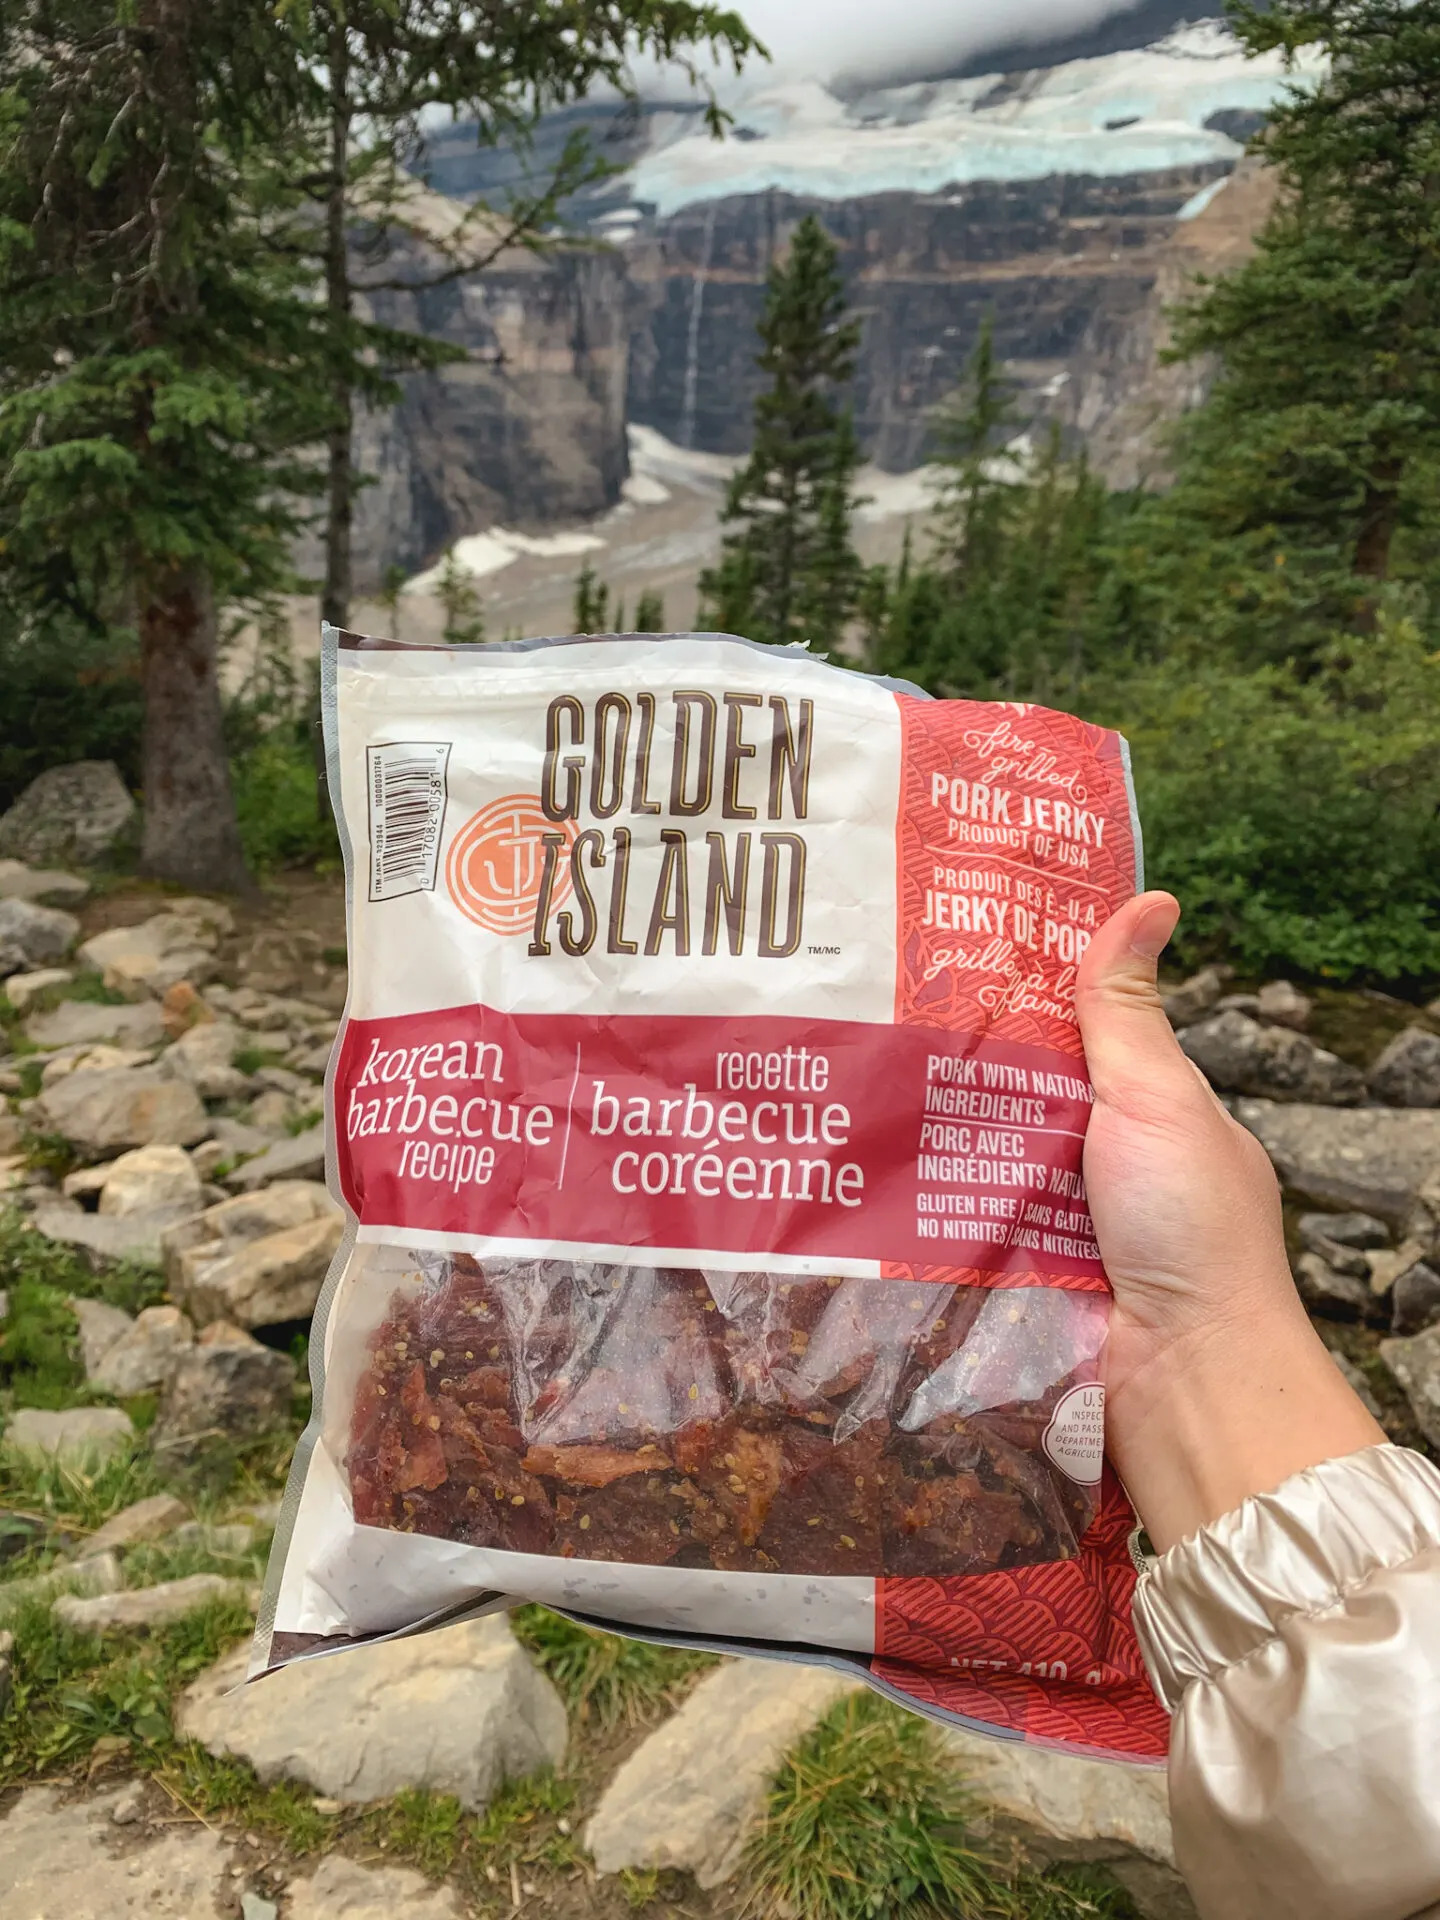 Golden Island pork jerky at the Plain of the Six Glaciers hiking trail in Lake Louise, Alberta